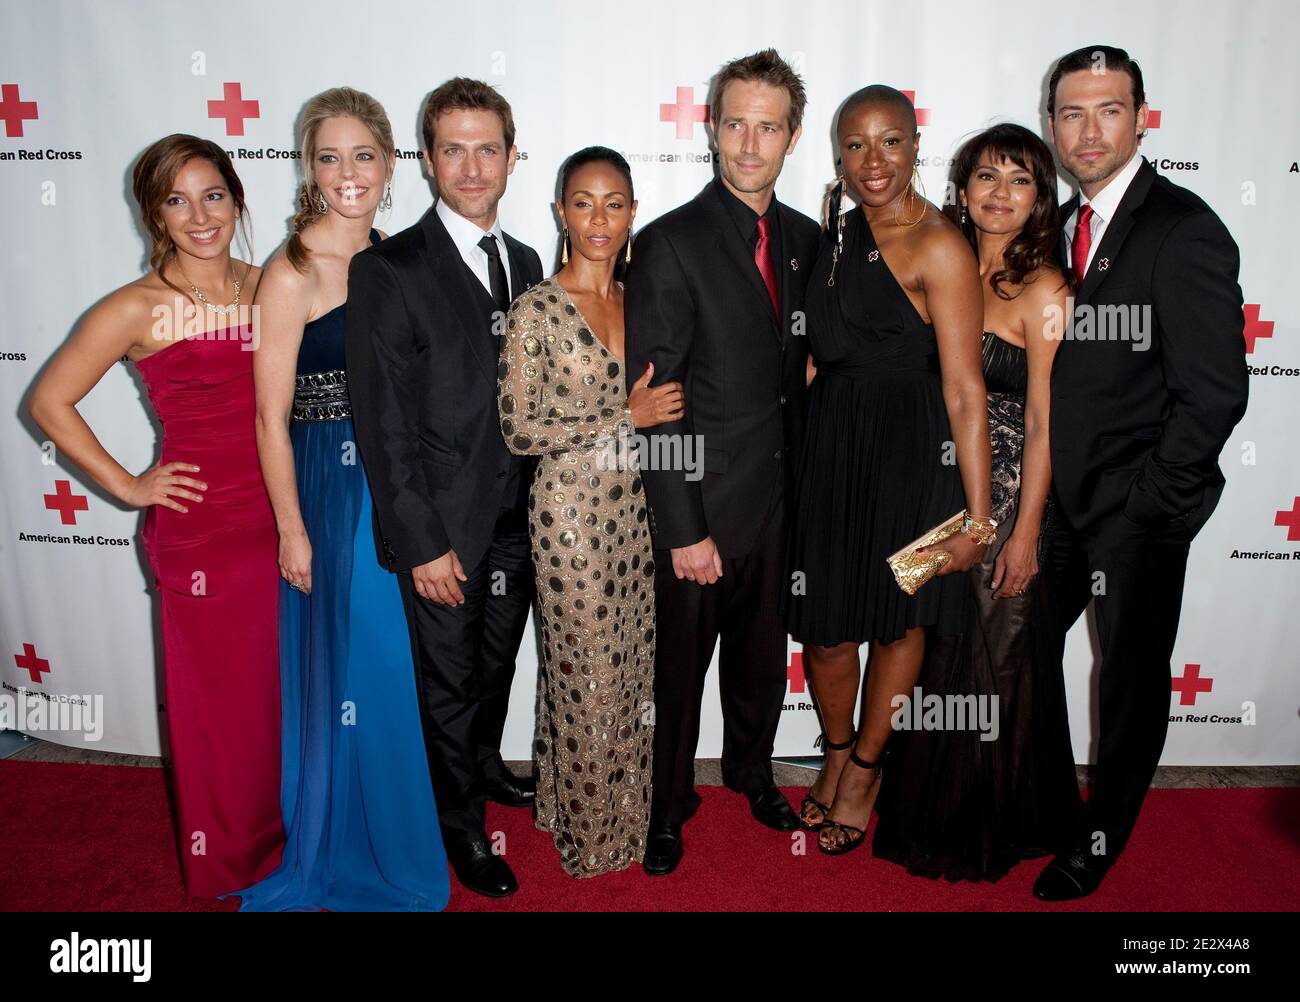 'Jada Pinkett Smith attends the American Red Cross: Santa Monica Chapter hosts annual red tie affair honoring herself and the cast of ''Hawthorne'' at the Fairmont Hotel in Los Angeles, CA, USA on April 17, 2010. (Pictured: Jada Pinkett Smith, Michael Vartan, David Julian Hirsh, Christina Moore, Suleka Mathew, Vanessa Lengies). Photo by Lionel Hahn/ABACAPRESS.COM' Stock Photo